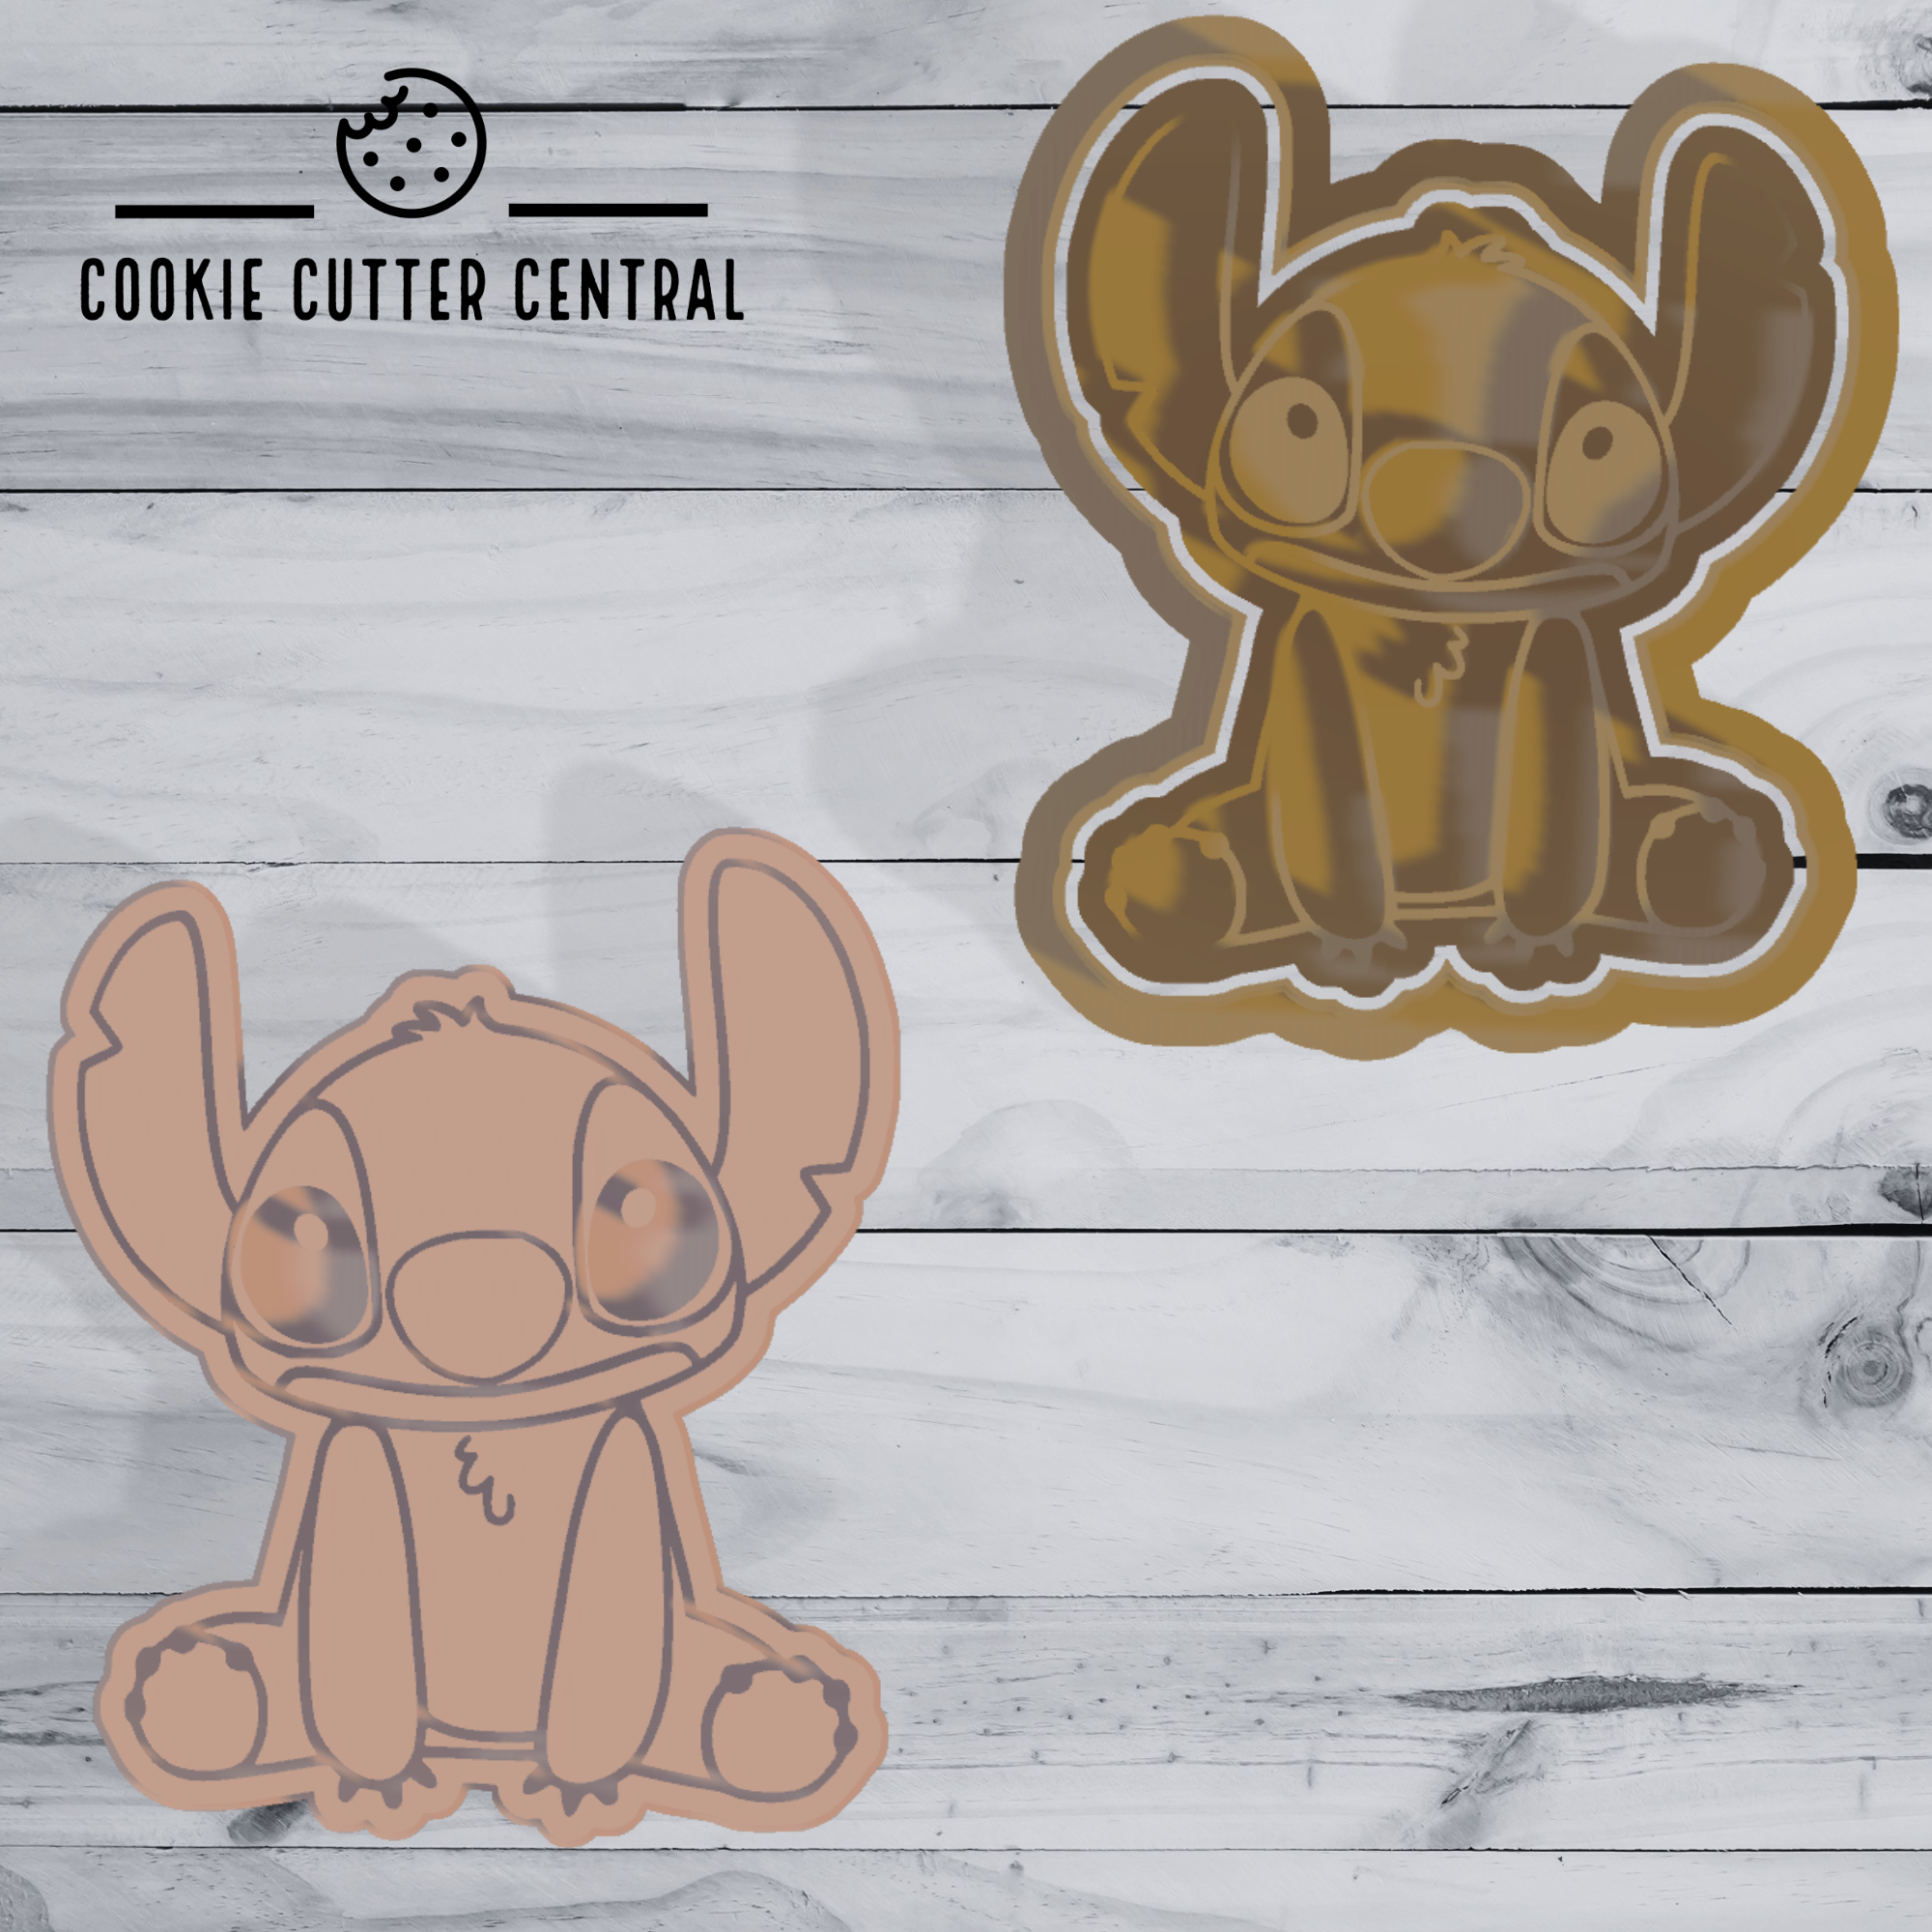 Cookie Cutter Inspired by Disney Lilo & Stitch 